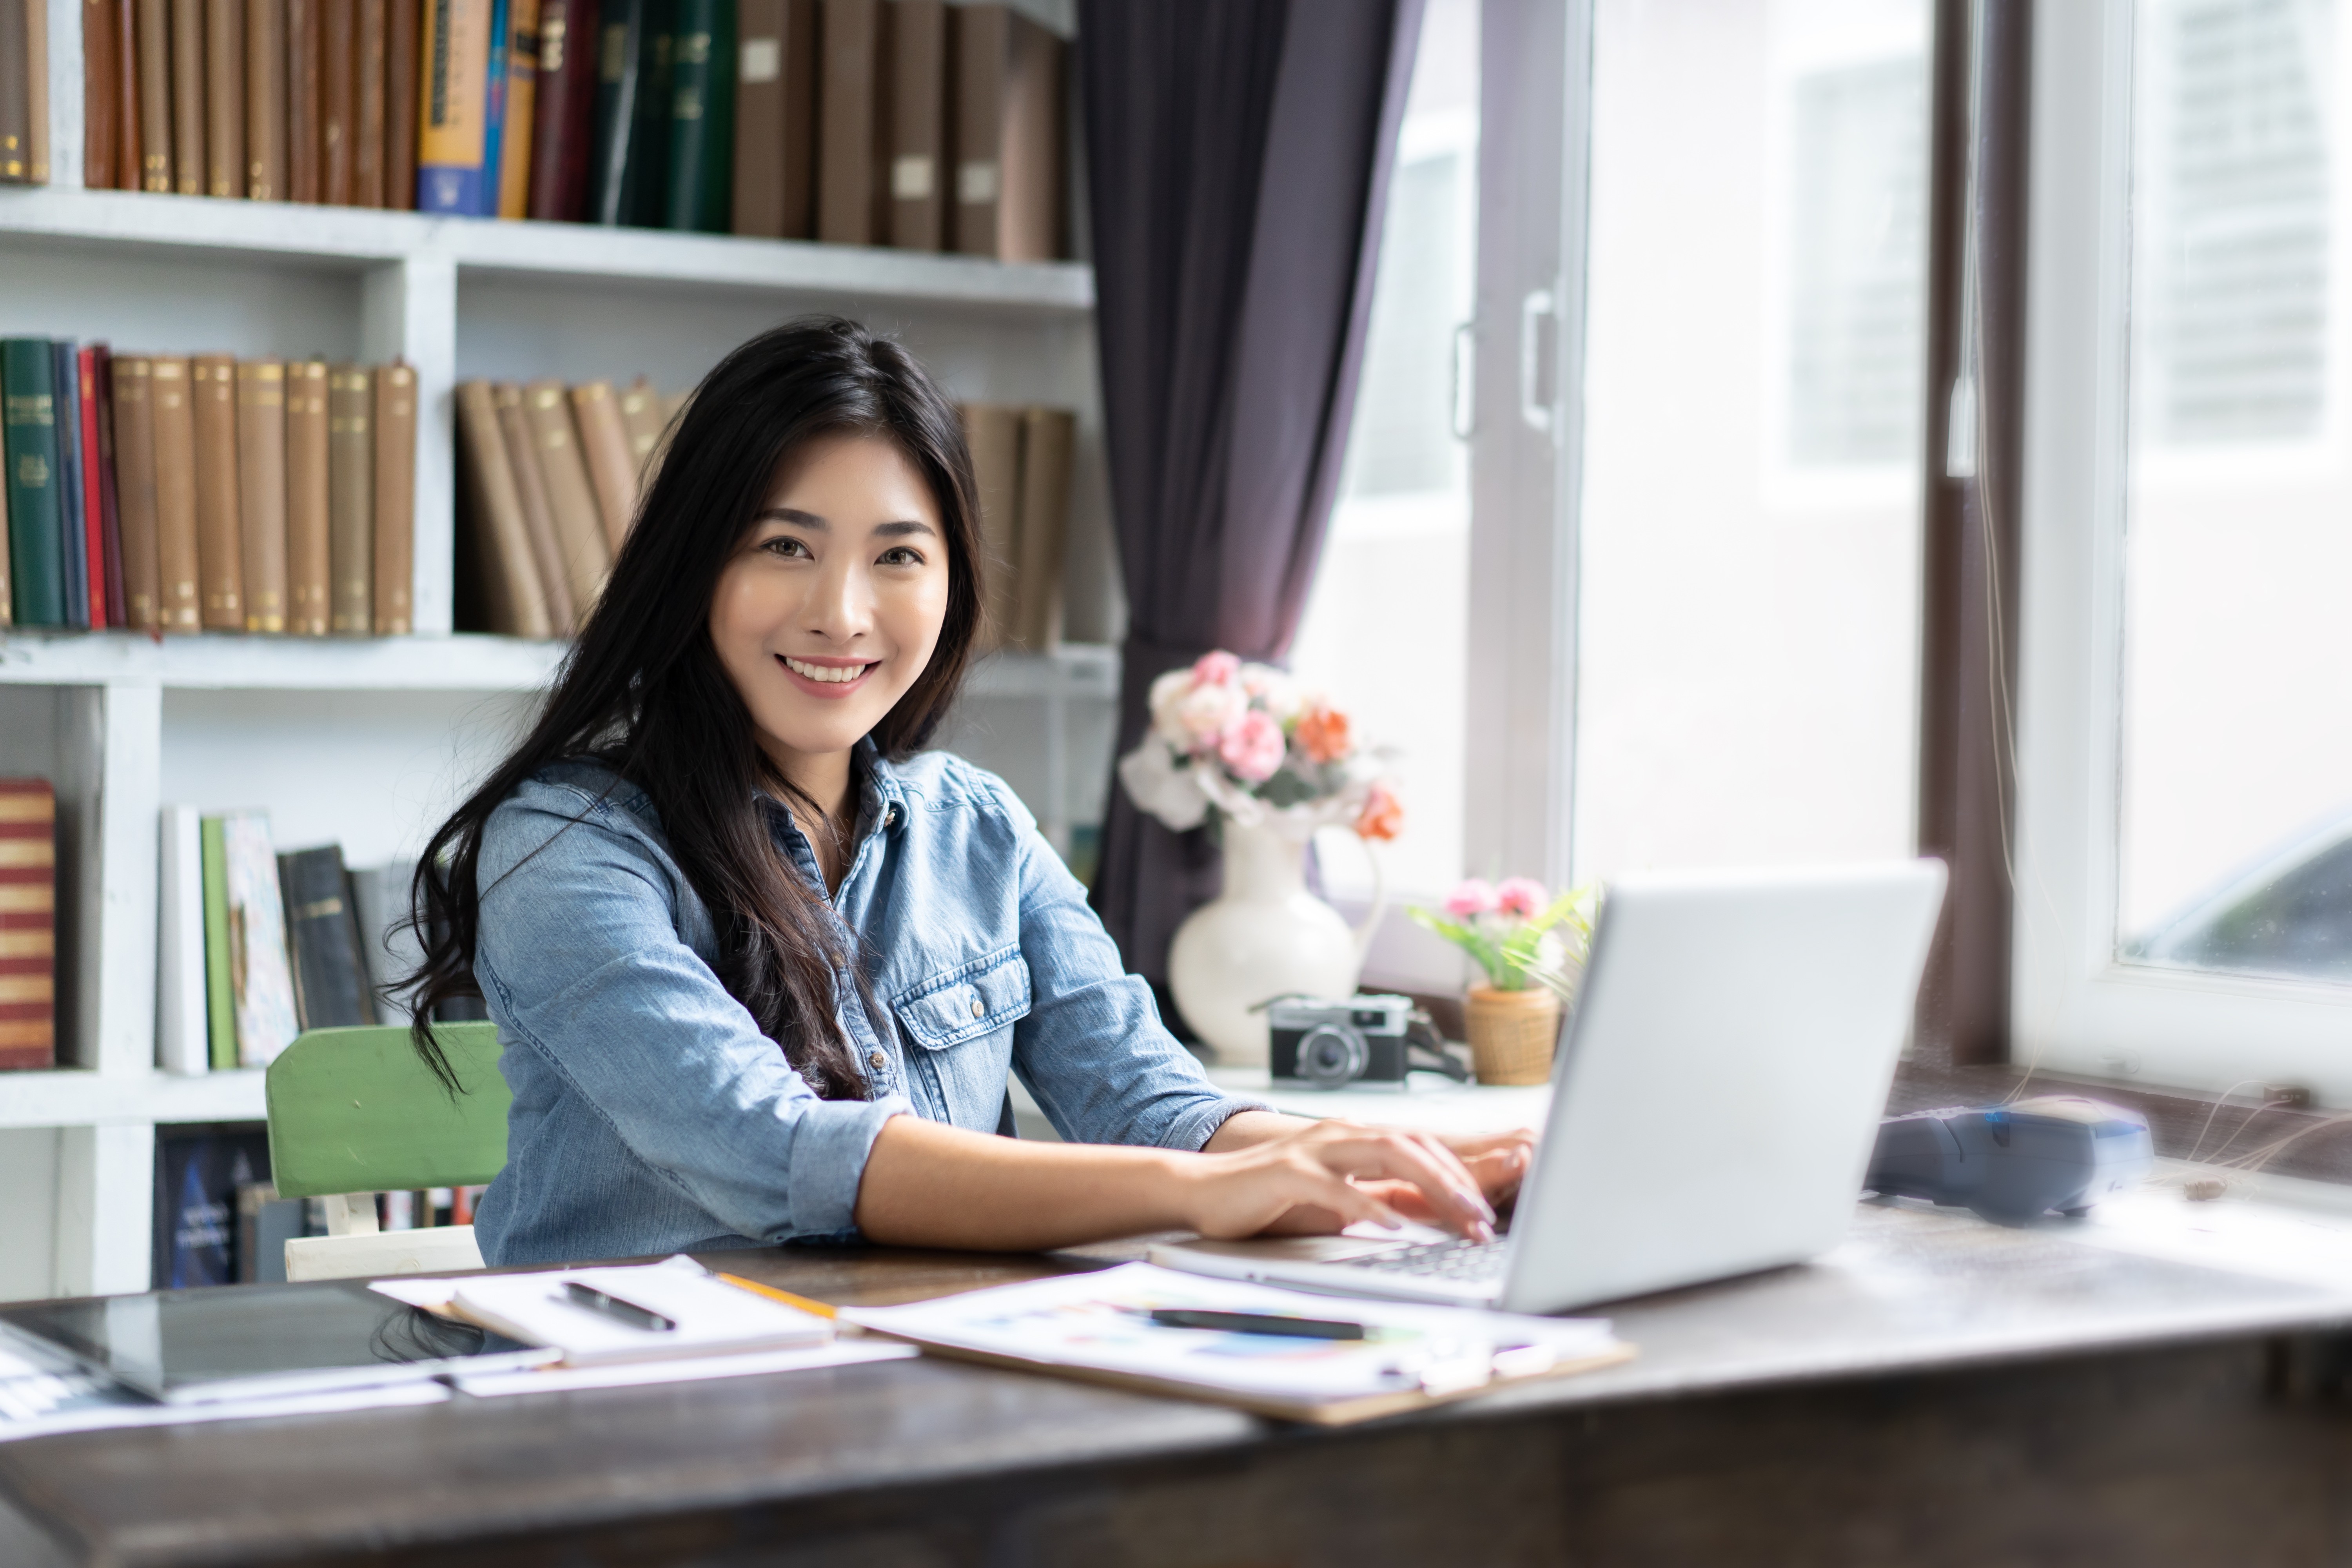 Many in East Asia are working from home because of the coronavirus. Photo: Shutterstock